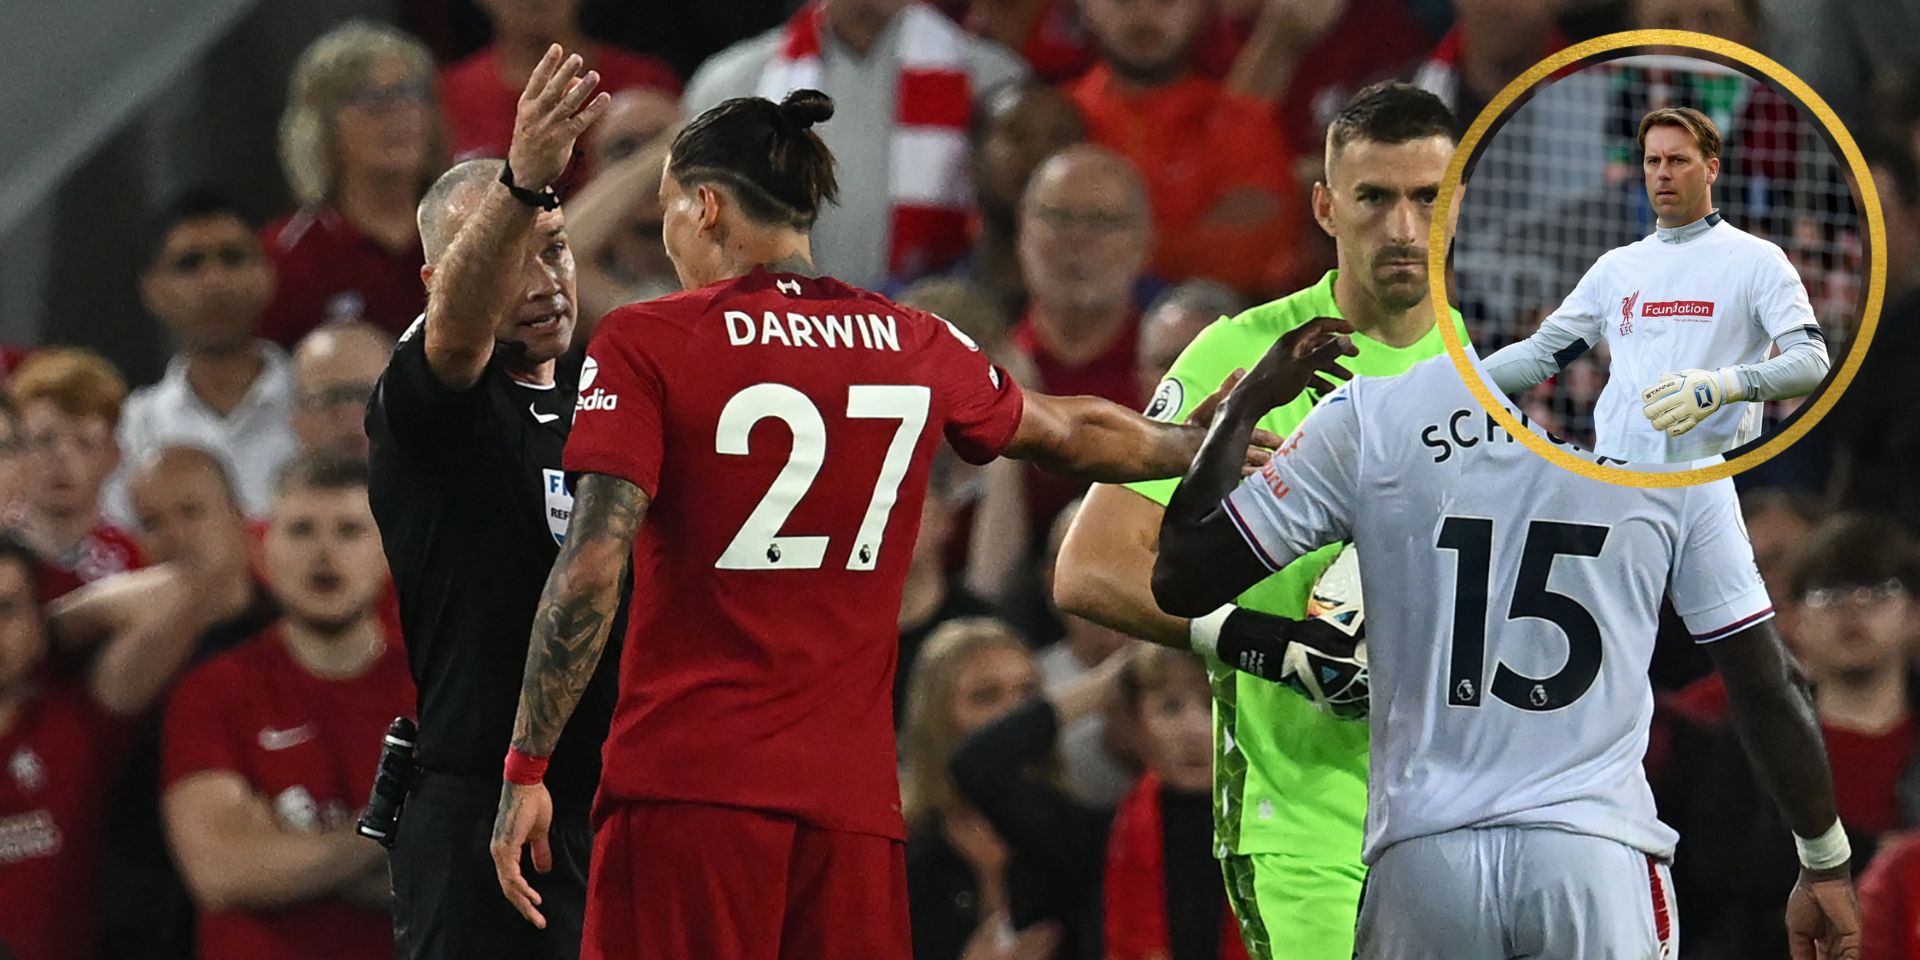 “You can’t do anything worse than this” – Ex-Red shares his thoughts on Darwin Nunez’s red card headbutt debut at Anfield